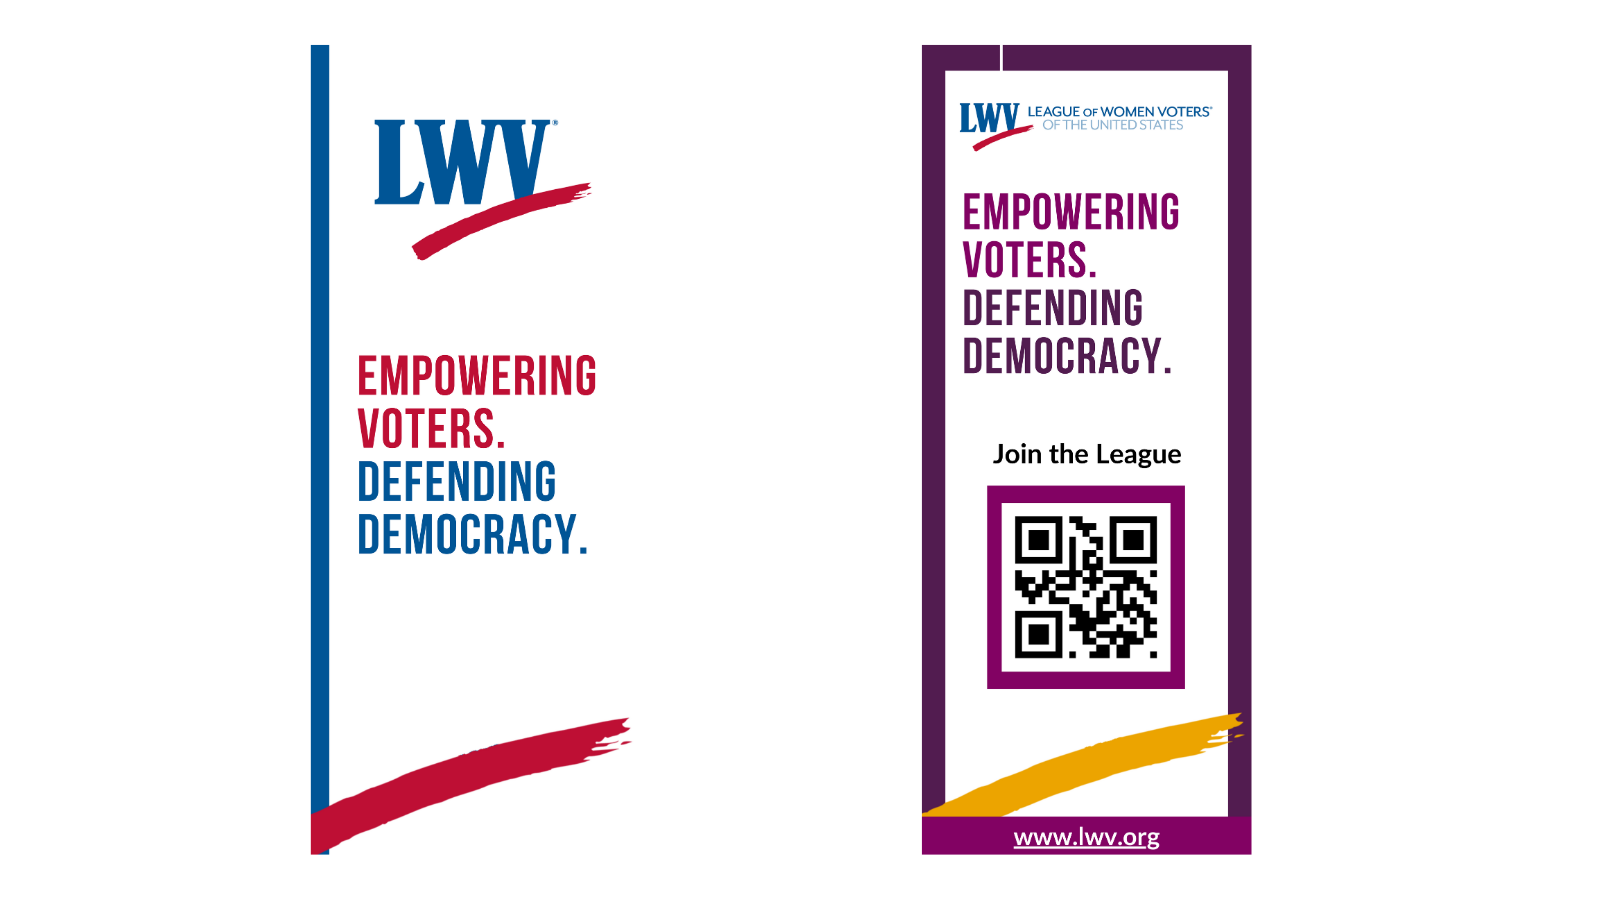 Two retractable banner designs. On the left, there is a white banner with a blue line at the top. The open LWV logo is featured, with the words "EMPOWERING VOTERS, DEFENDING DEMOCRACY" in the middle. The red LWV swoosh is on the bottom of this banner. On the right, there is a purple banner with a white box on the inside. The LWVUS logo is at the top, with the words "EMPOWERING VOTERS, DEFENDING DEMOCRACY" underneath. There is a QR code with the words "Join the League" above, and a yellow LWV swoosh and URL to www.lwv.org below that.